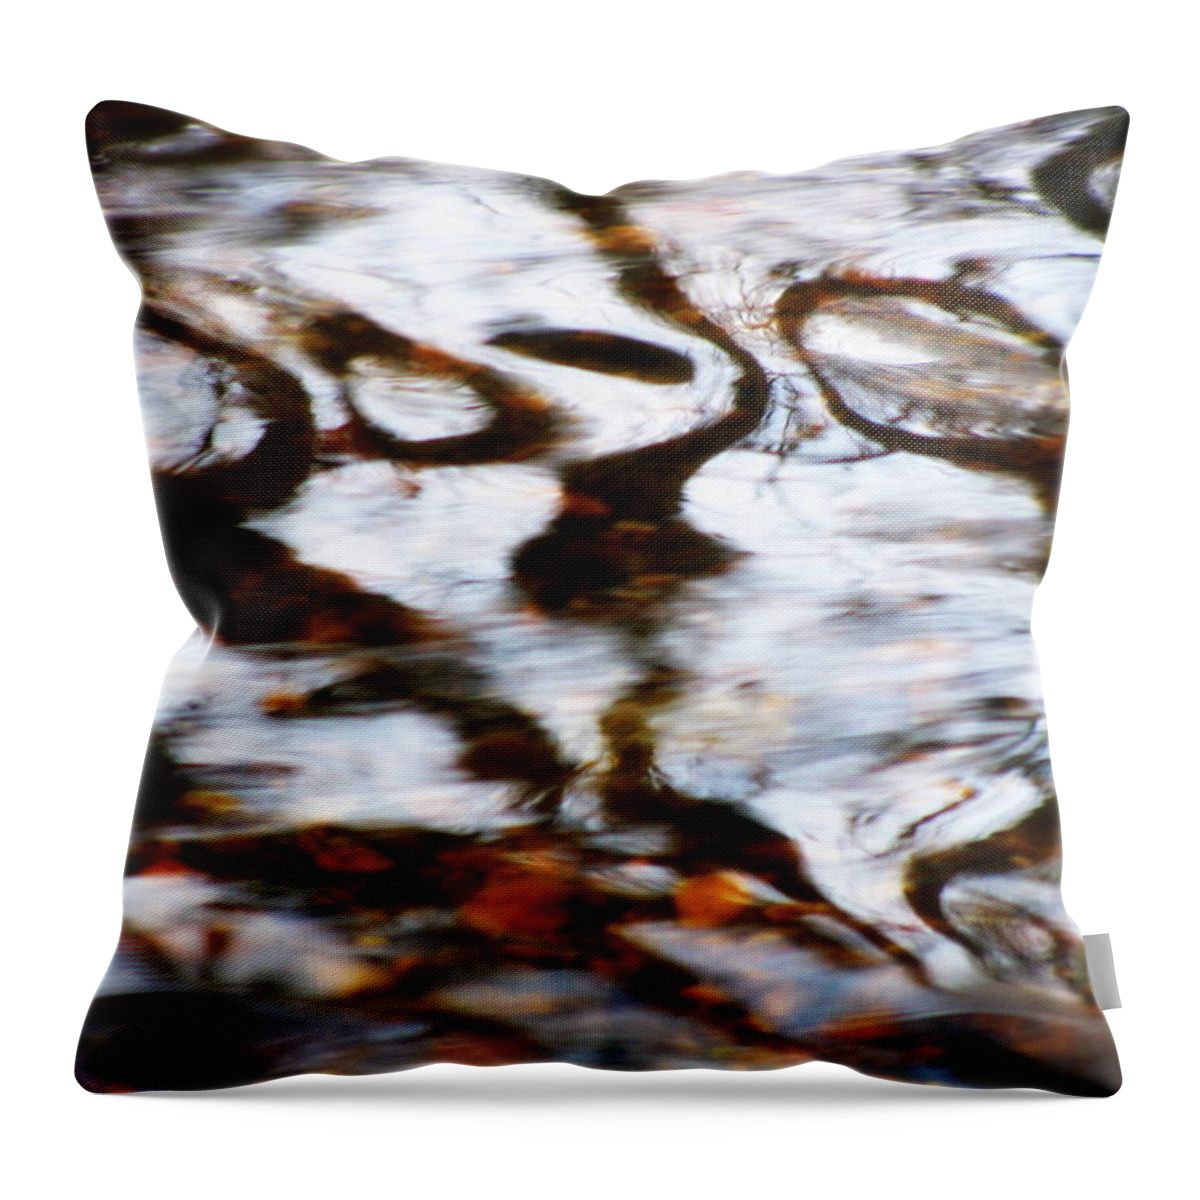 Water Throw Pillow featuring the photograph Rushing Water by Deborah Crew-Johnson